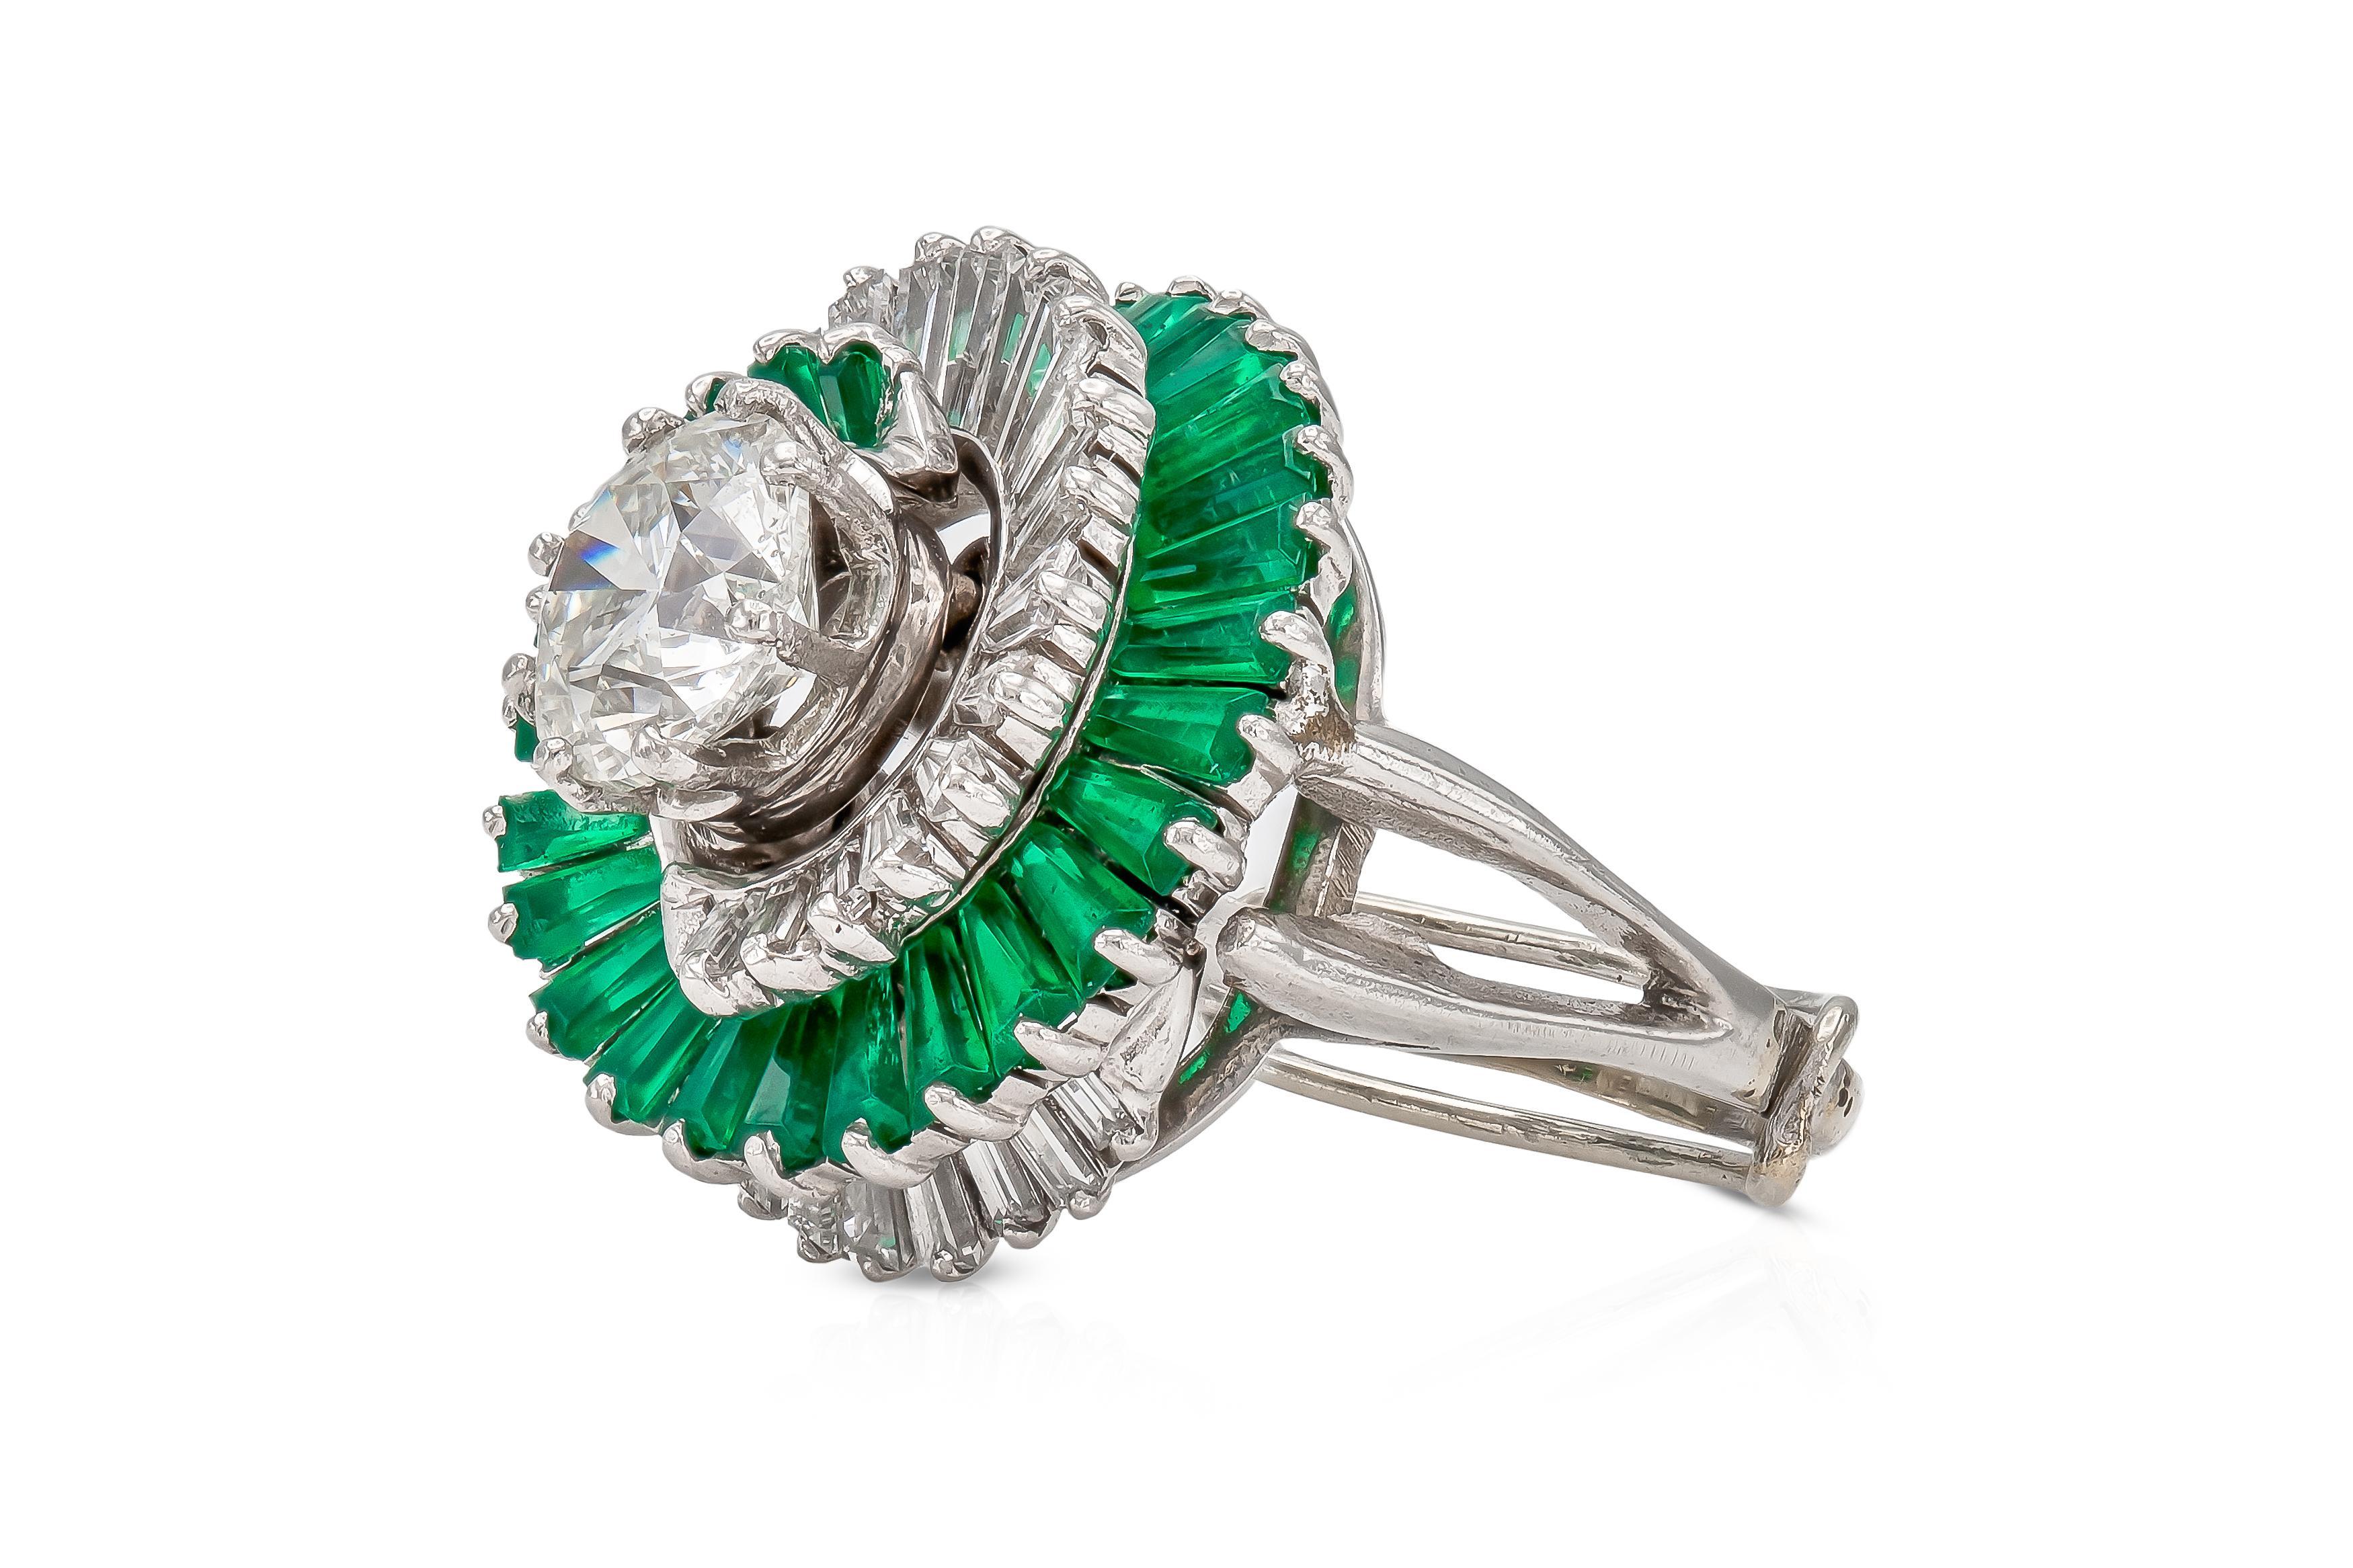 Finely crafted in platinum with a Round Brilliant cut center Diamond weighing 1.52 carats, J color, SI2 clarity.
The Diamond is set in a swirl setting featuring Tapered Baguette cut Emeralds and Diamonds.
Circa 1950s
Size 5 (3 1/2 with guard),